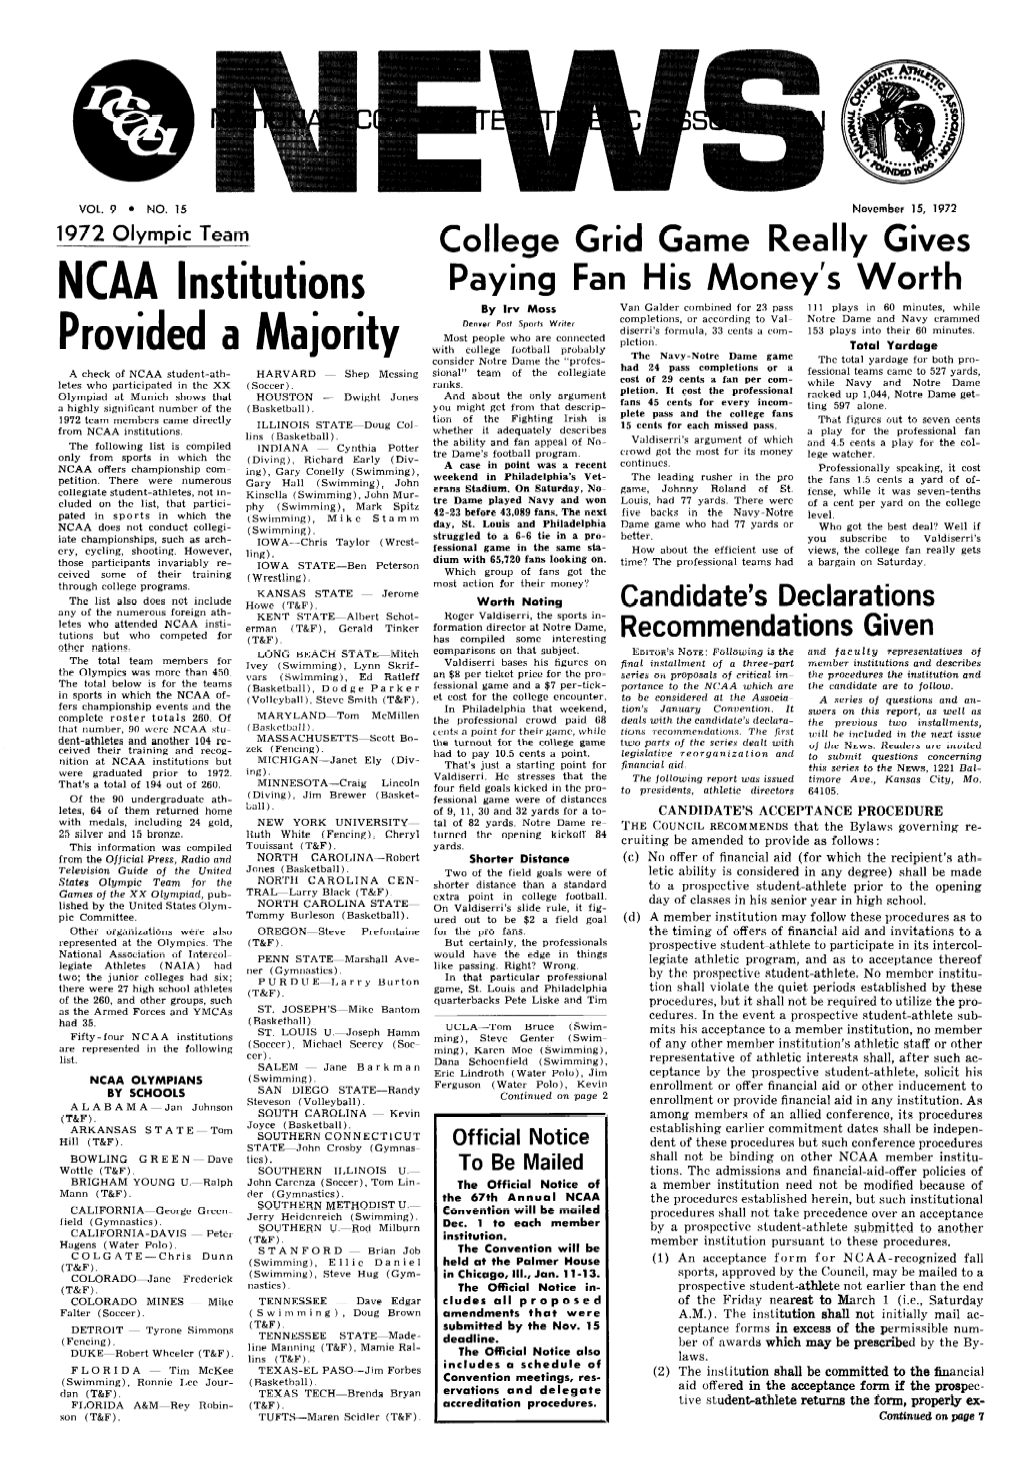 The NCAA NEWS Feels It Makes a Point, Discusses a Topic Which Will Nften Was Judged by the Way He Treated His Interest NEWS Readers